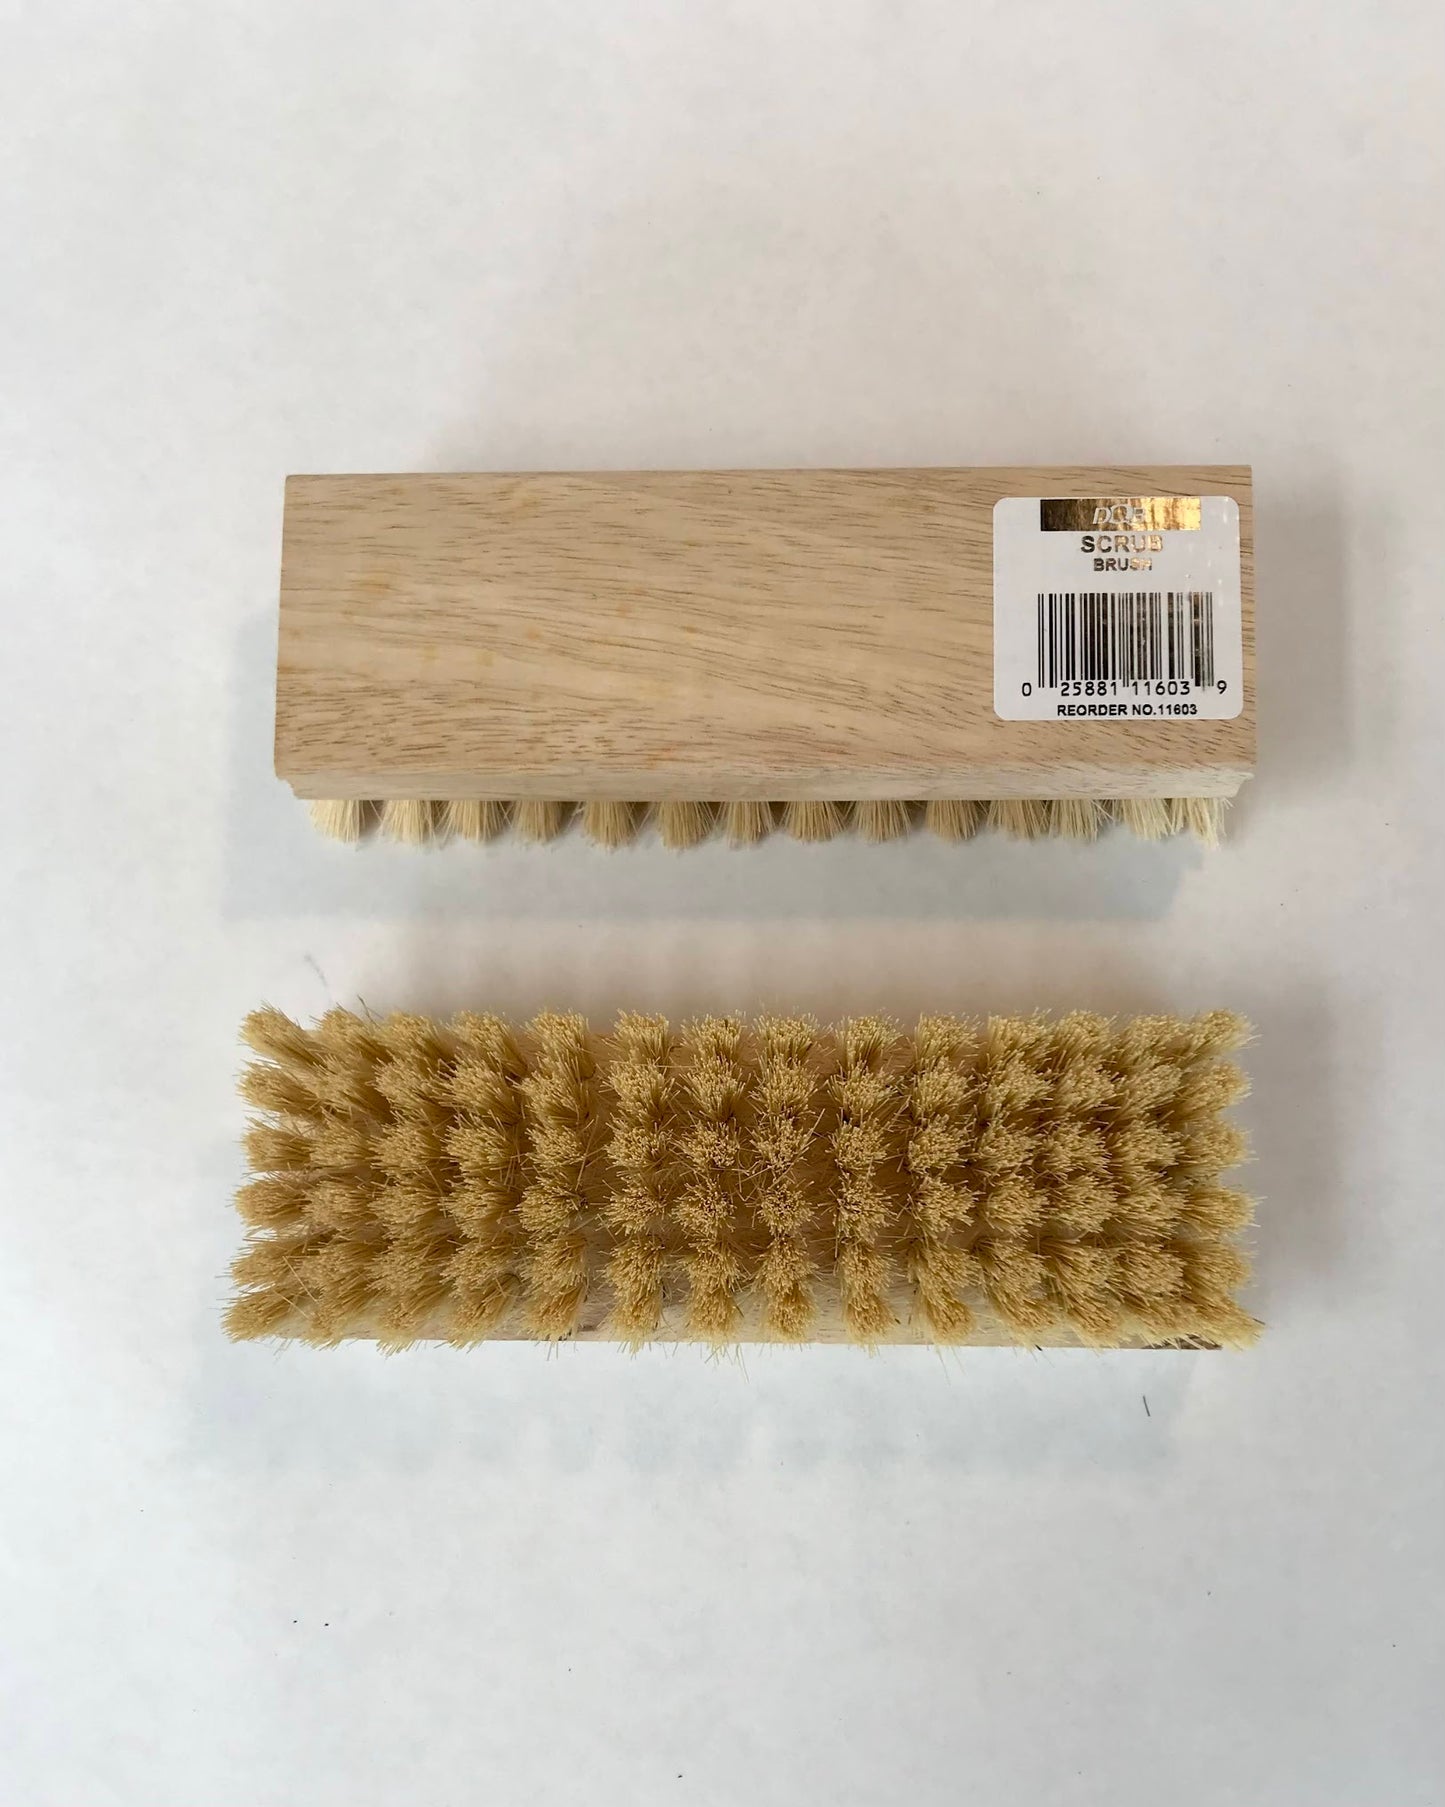 Large wooden cementing brush